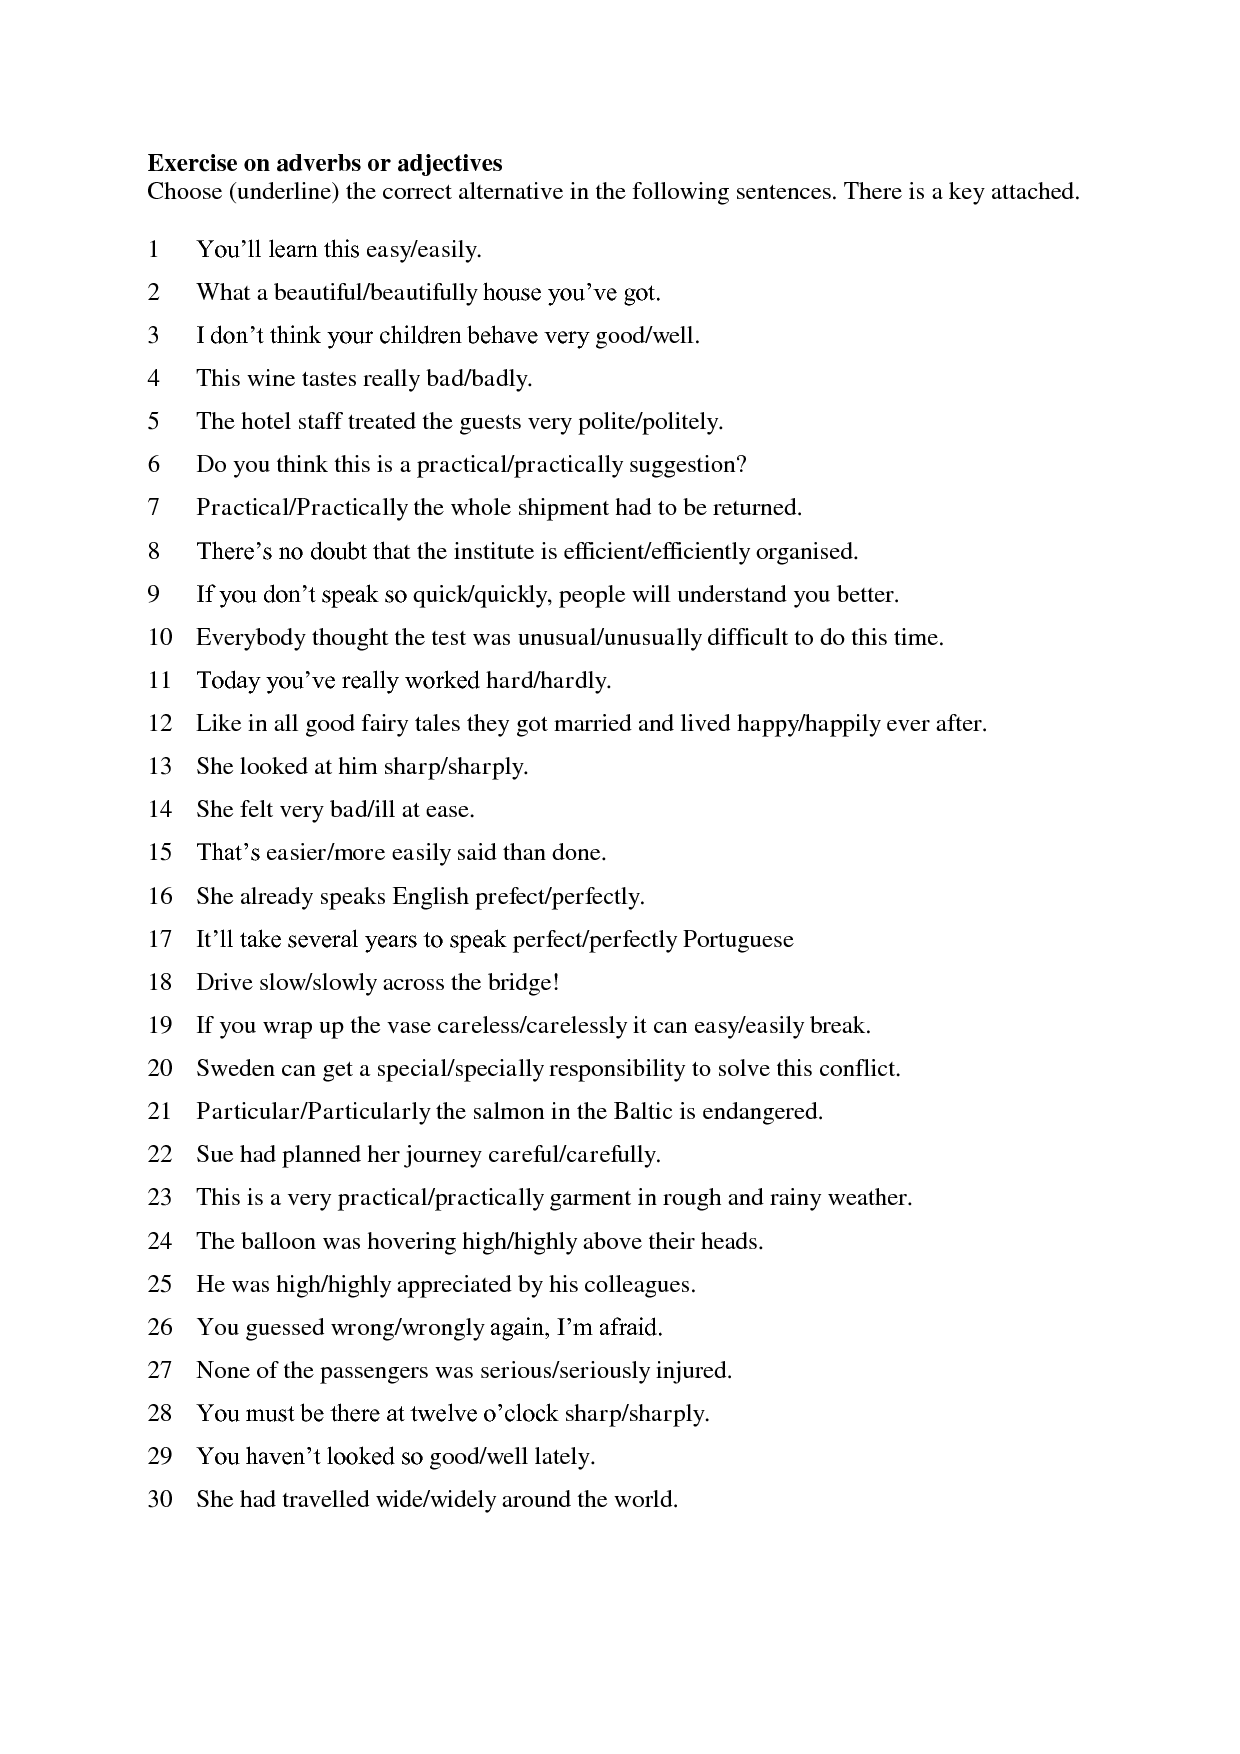 11-best-images-of-adverb-clauses-worksheets-adverbs-and-adjectives-worksheet-7th-grade